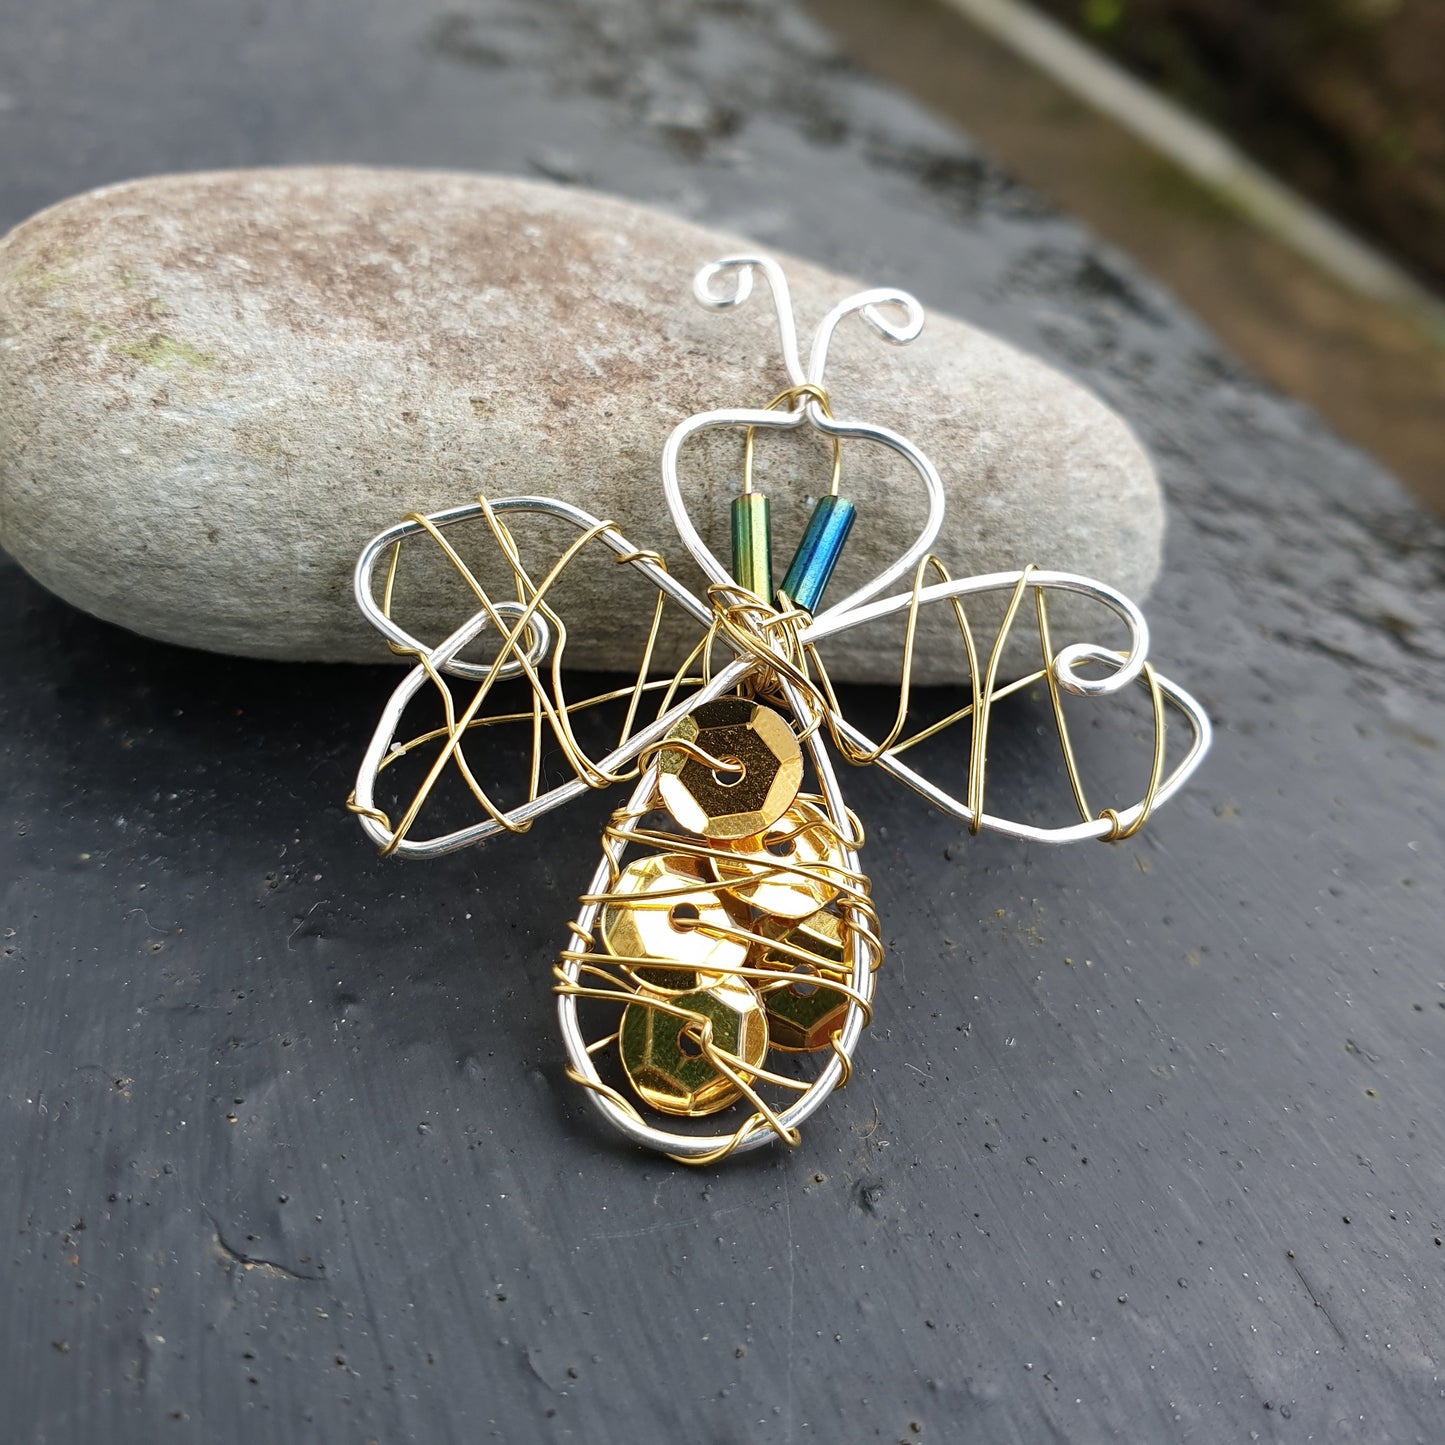 Wire Beaded Insects: #peaceandcraft Workshop Project 2020